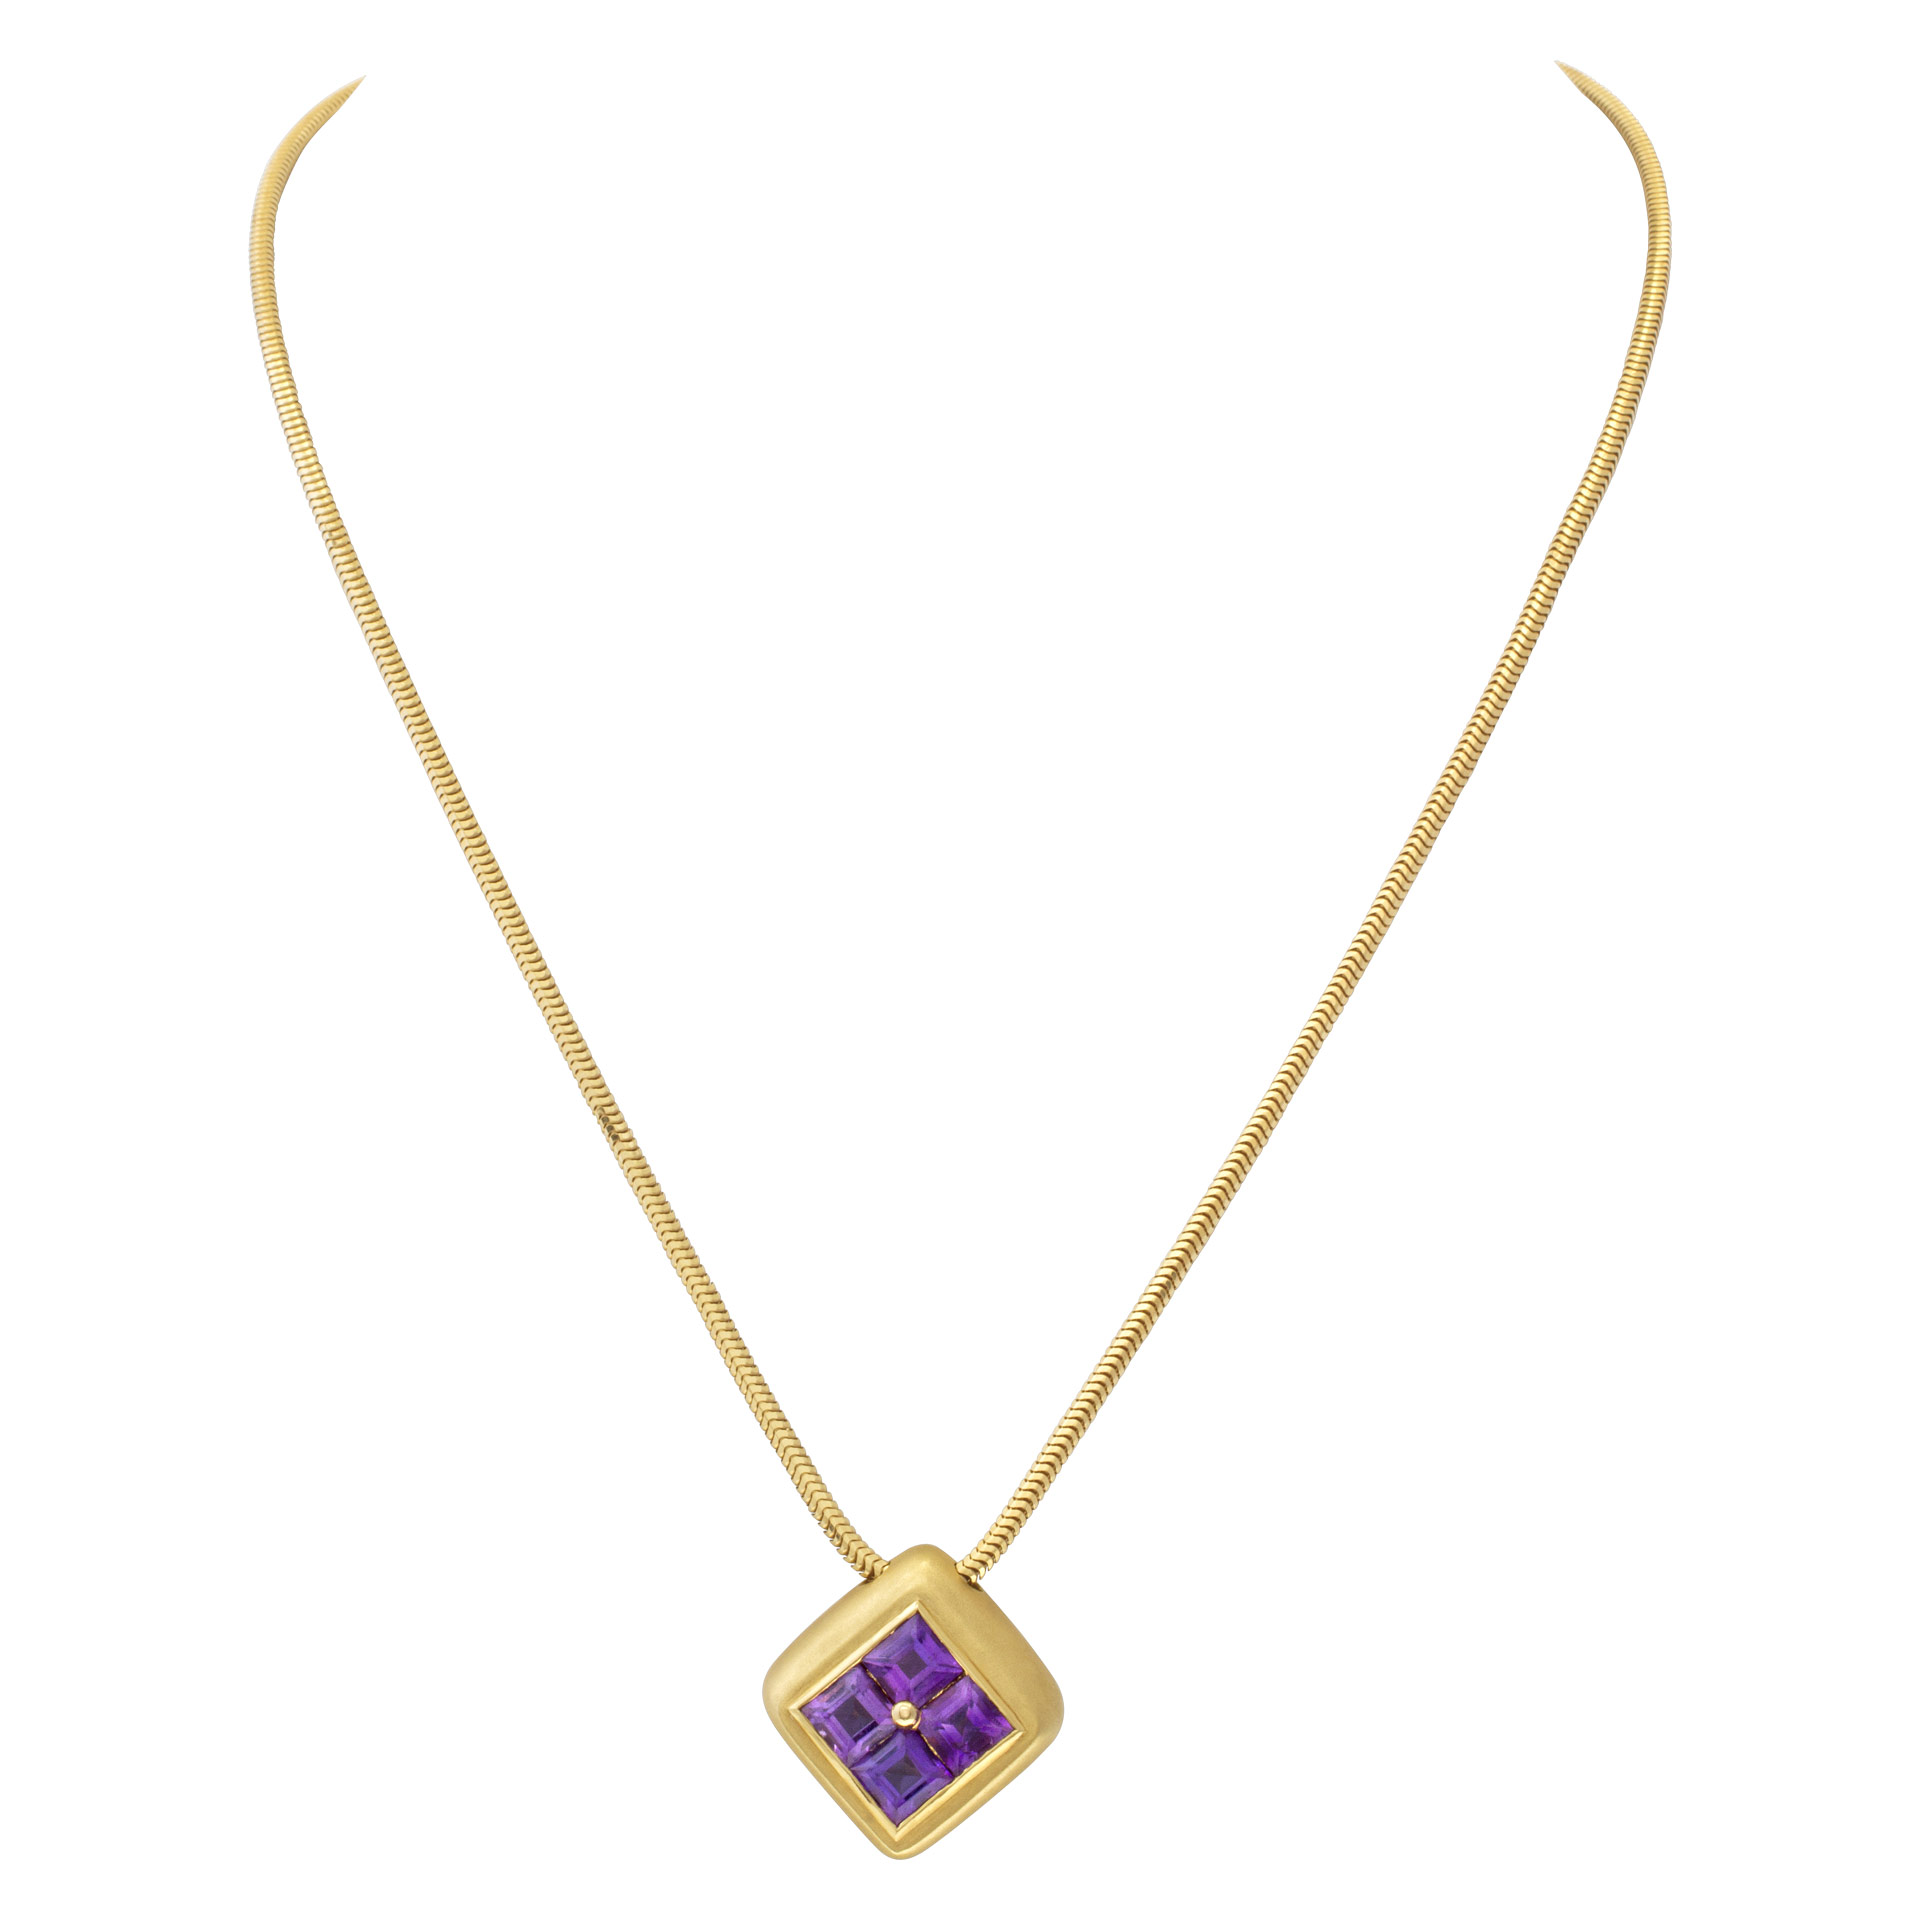 Amethyst pendant necklace in 18k image 1